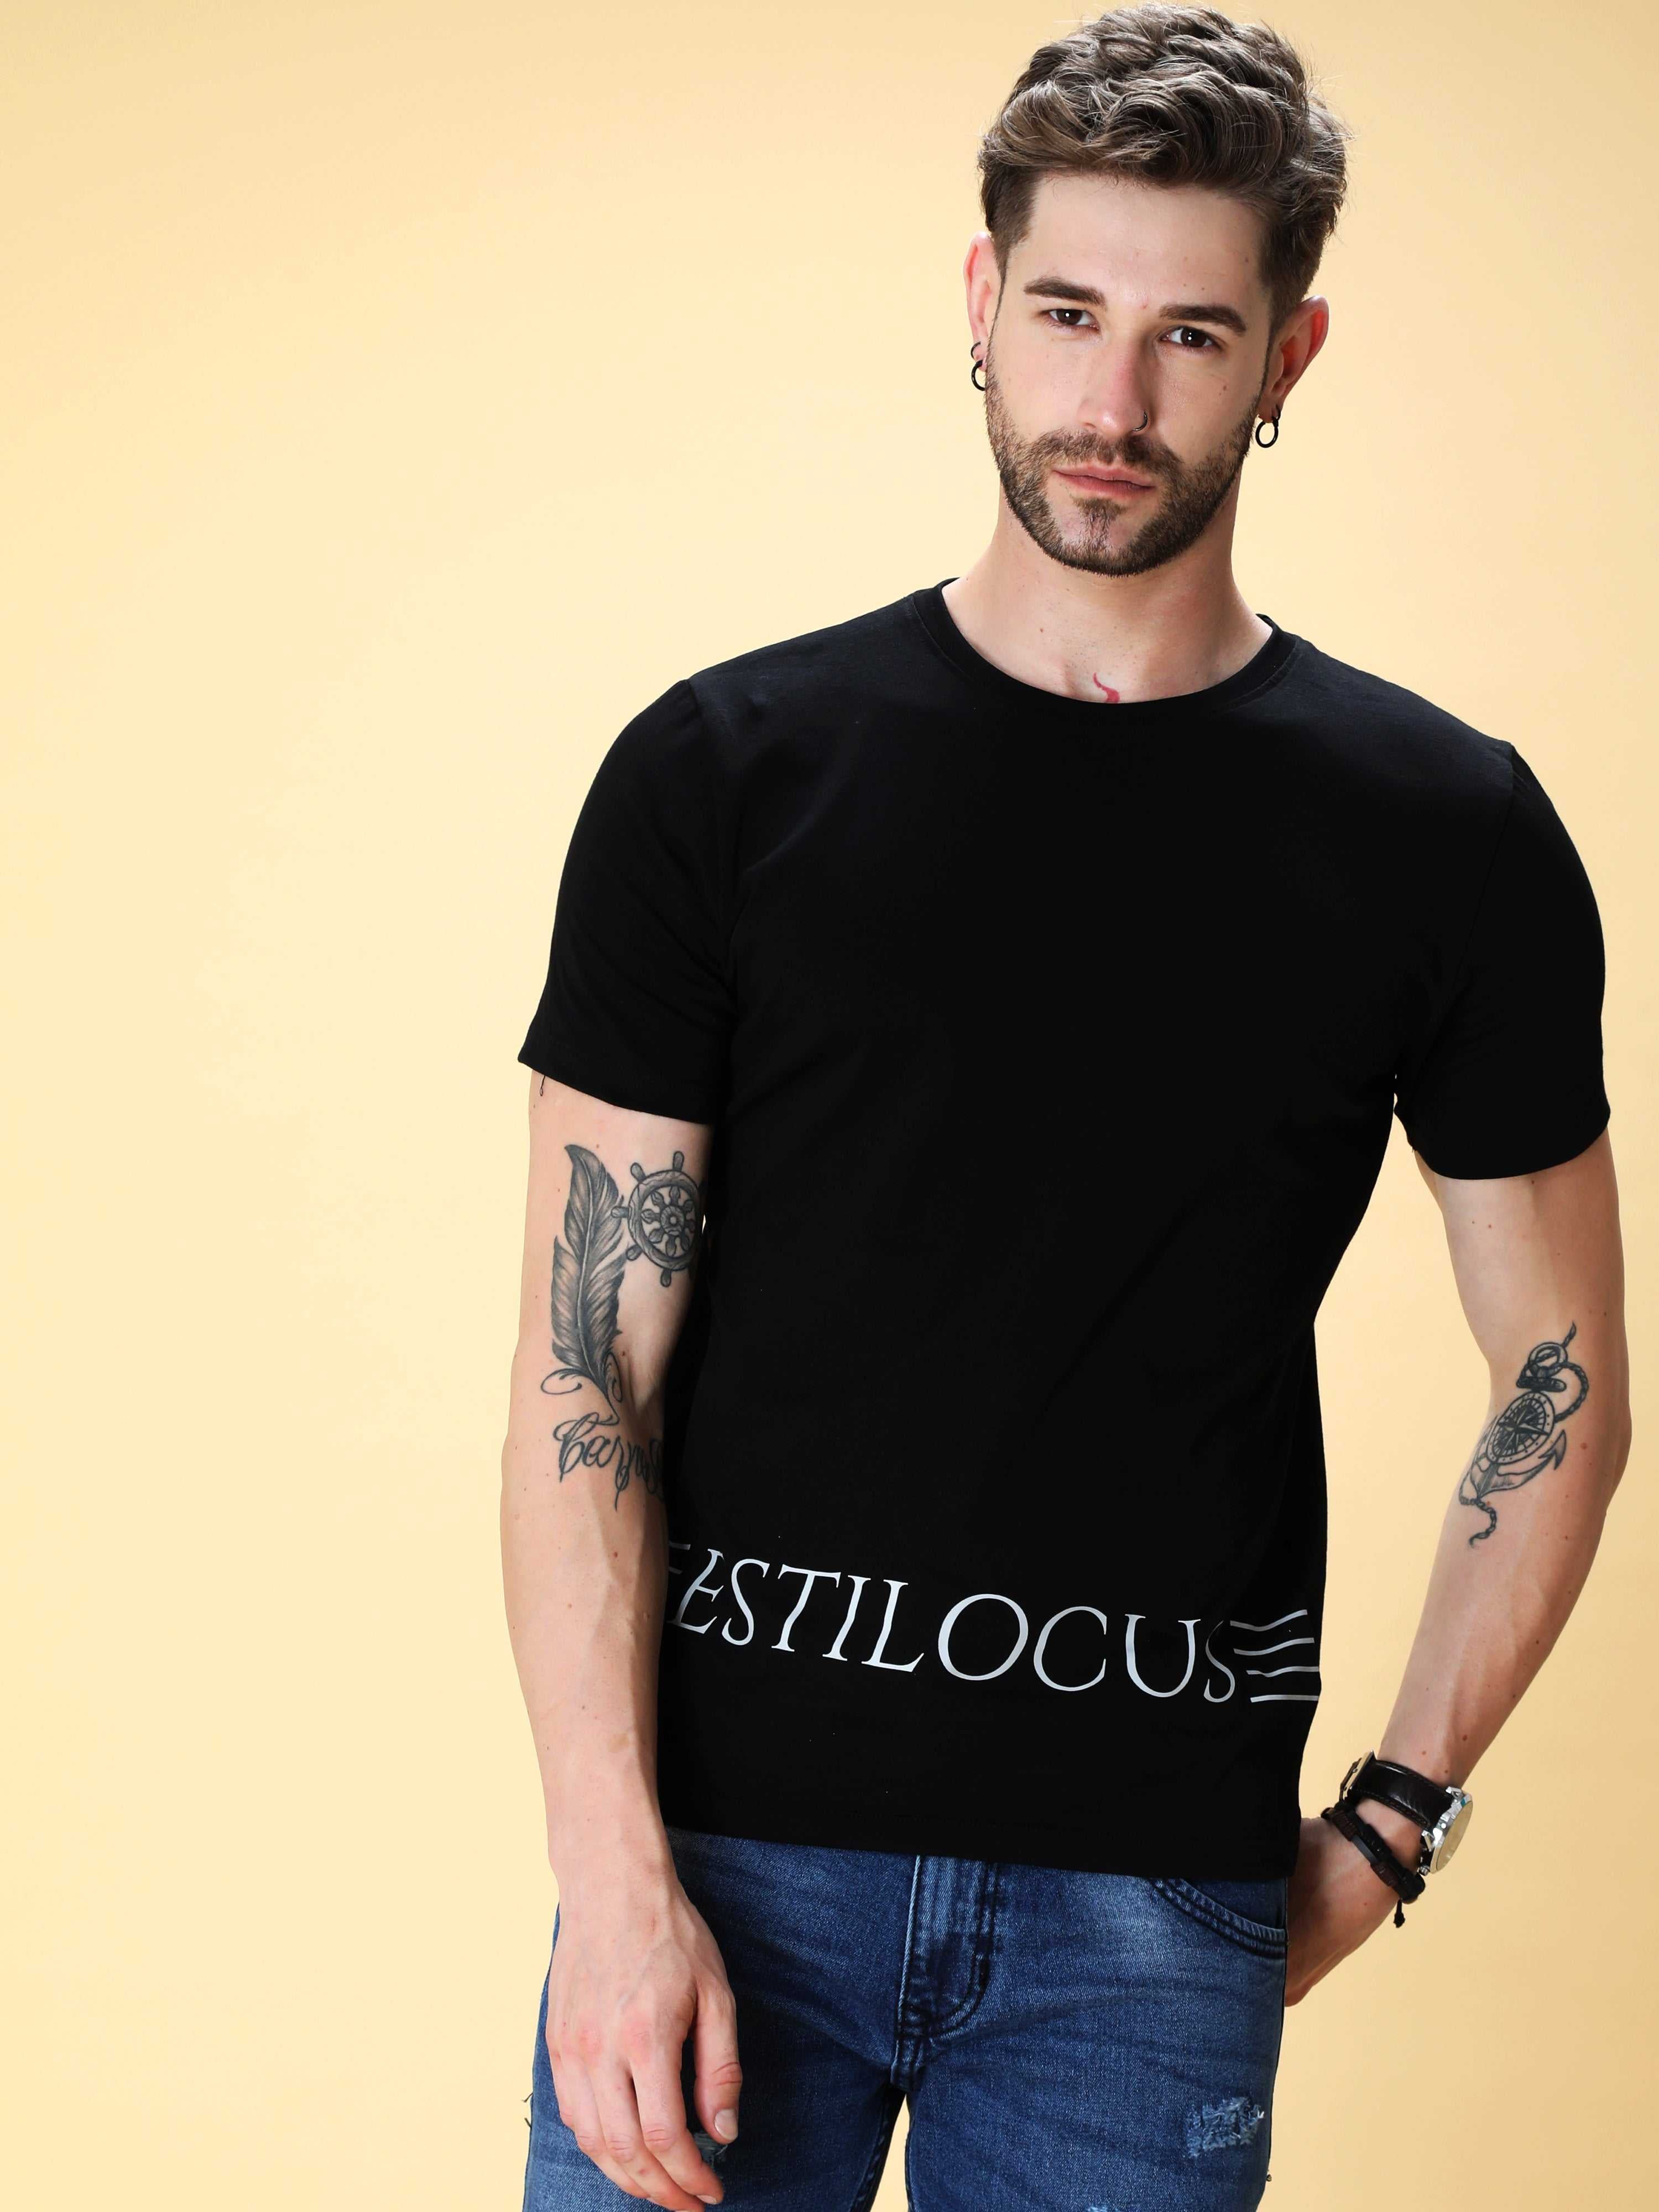 Jade Black Crew neck T-Shirt shop online at Estilocus. This pure cotton printed T-shirt is a stylish go-to for laidback days. Cut in a comfy regular fit. • 100% Cotton knitted interlock 190GSM• Bio washed fabric• Round neck T-shirt • Half sleeve • Suits t